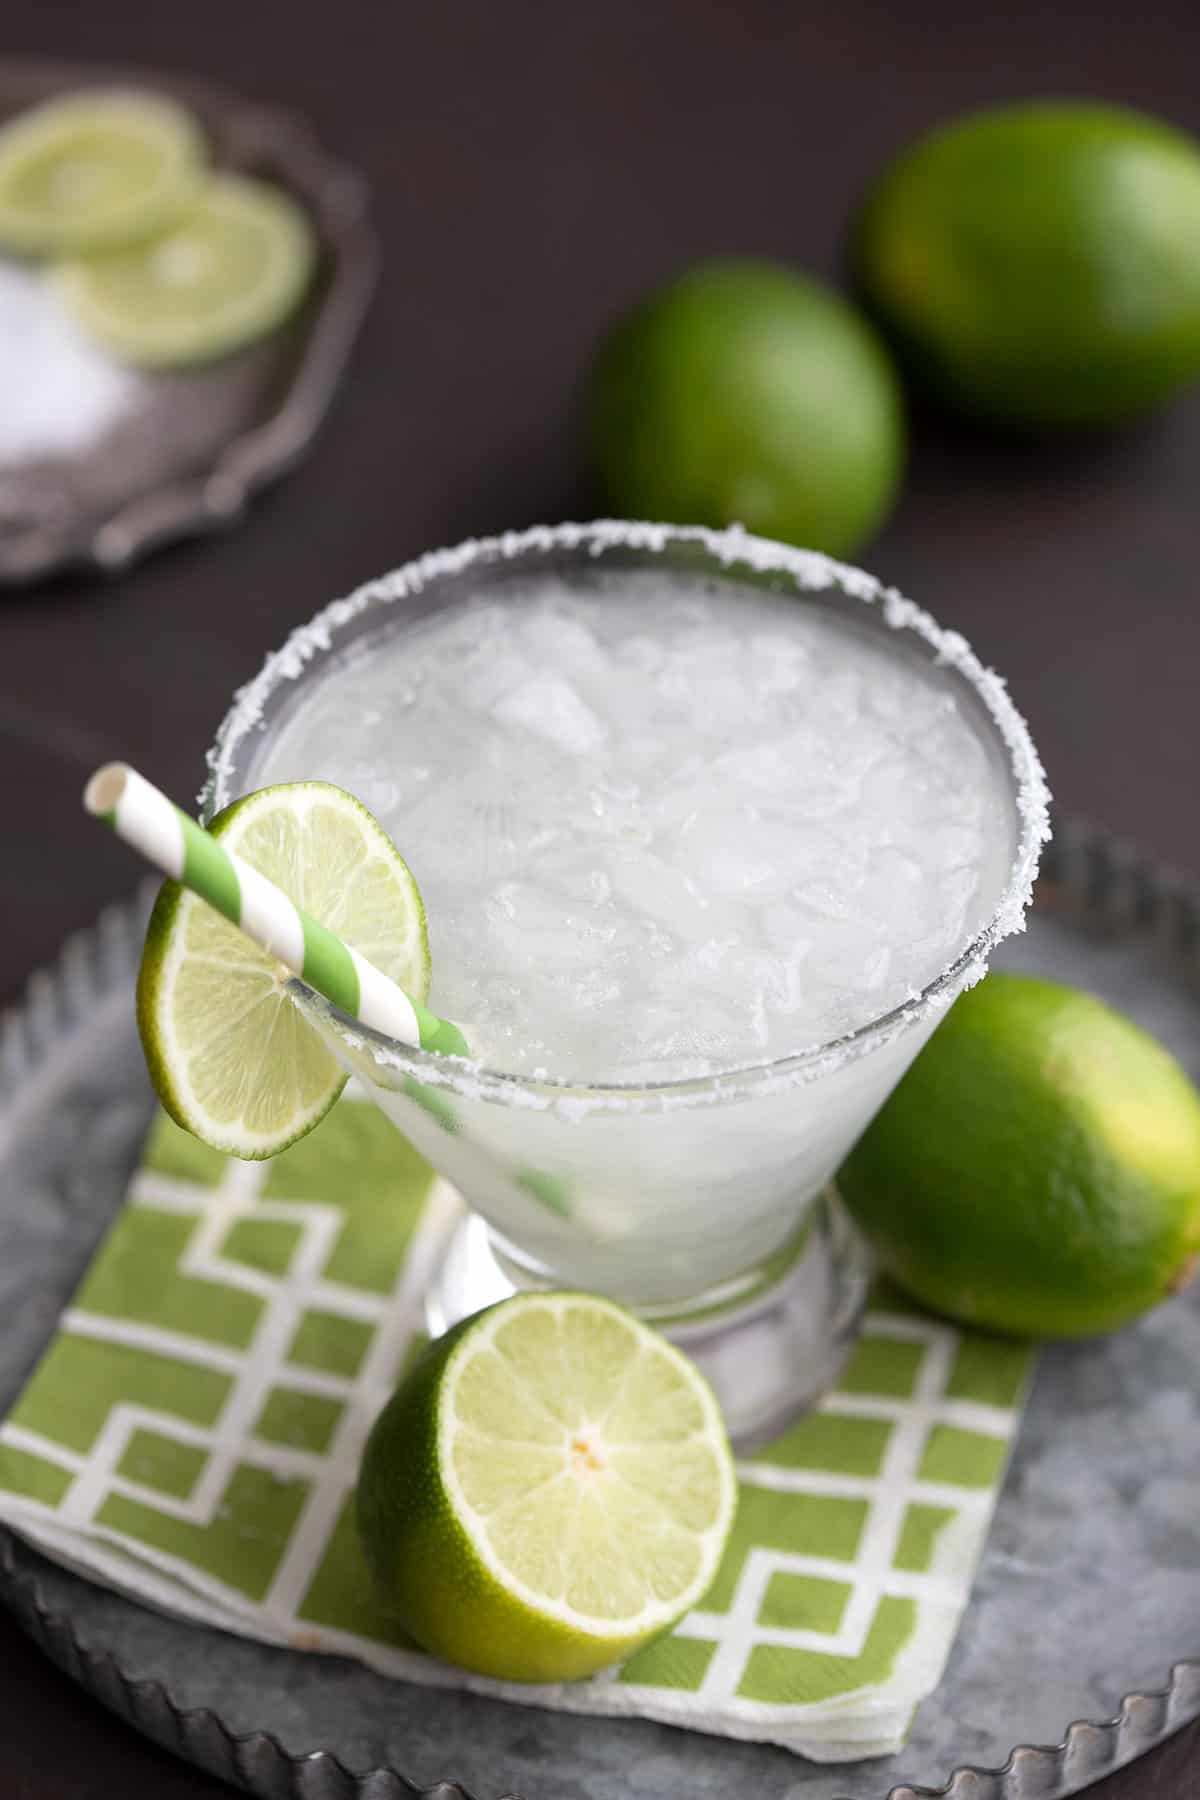 Image of a sugar-free margarita with sliced limes.